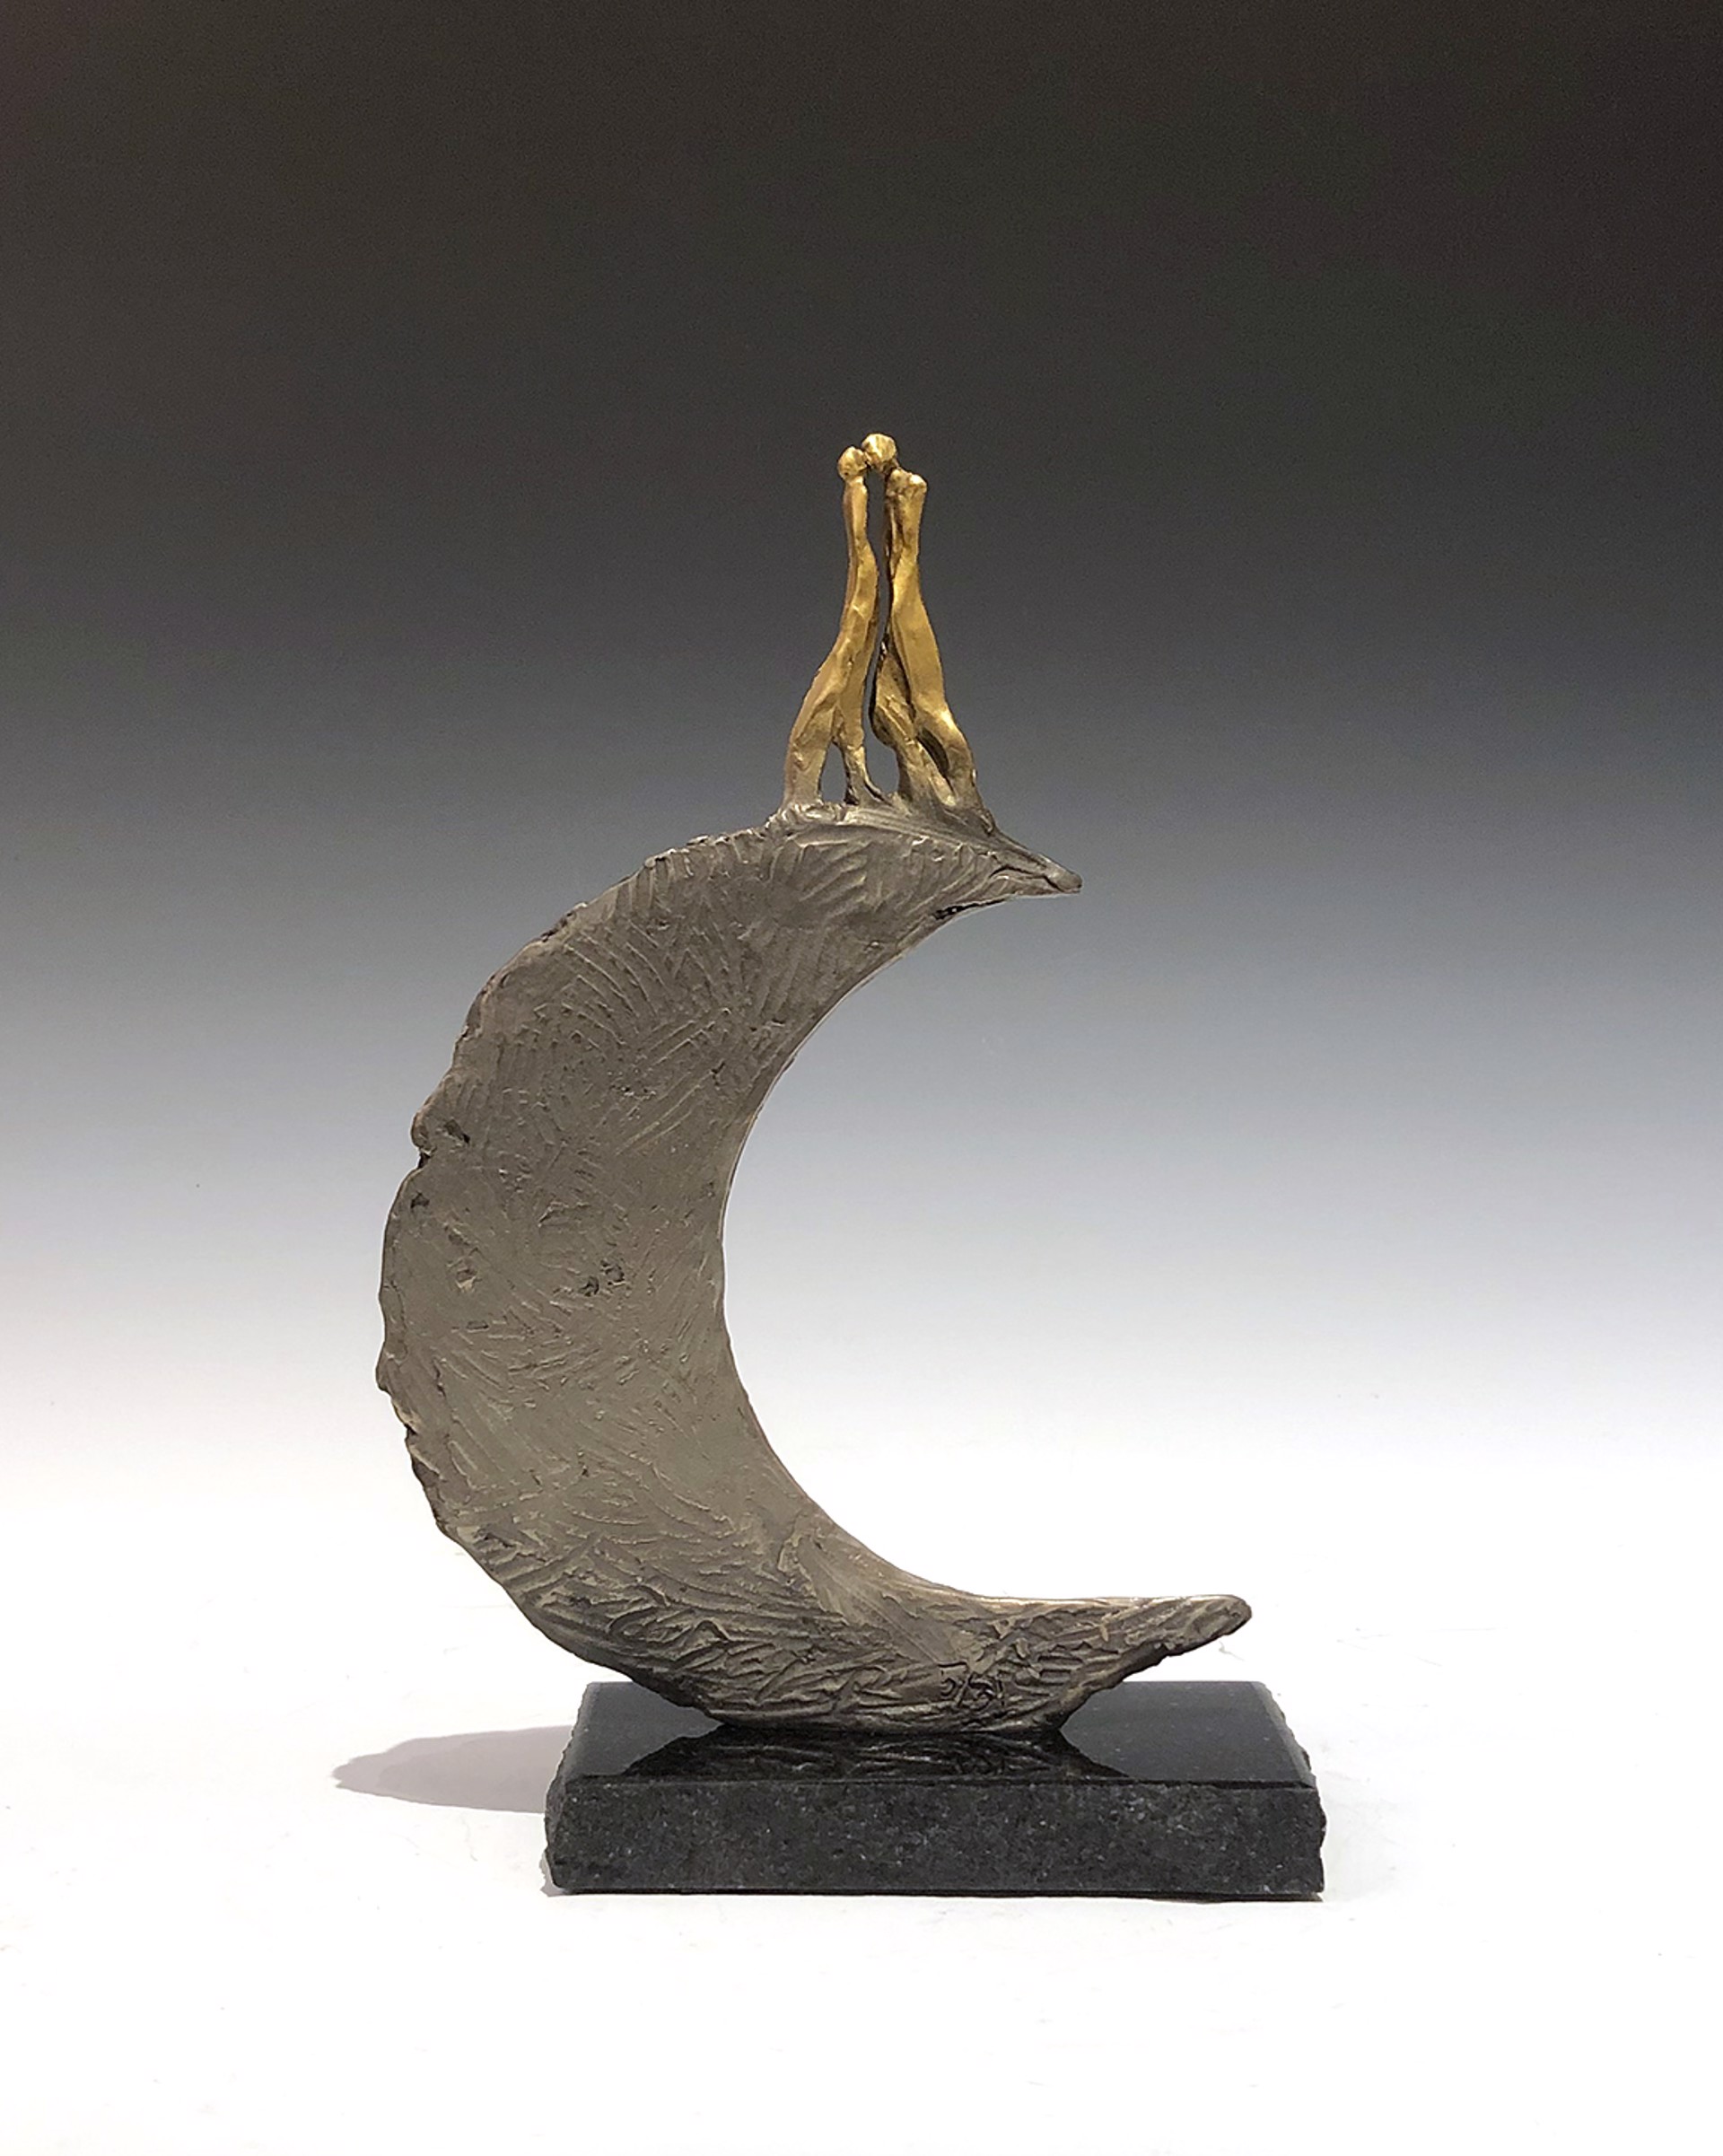 Over the Moon by Jane DeDecker